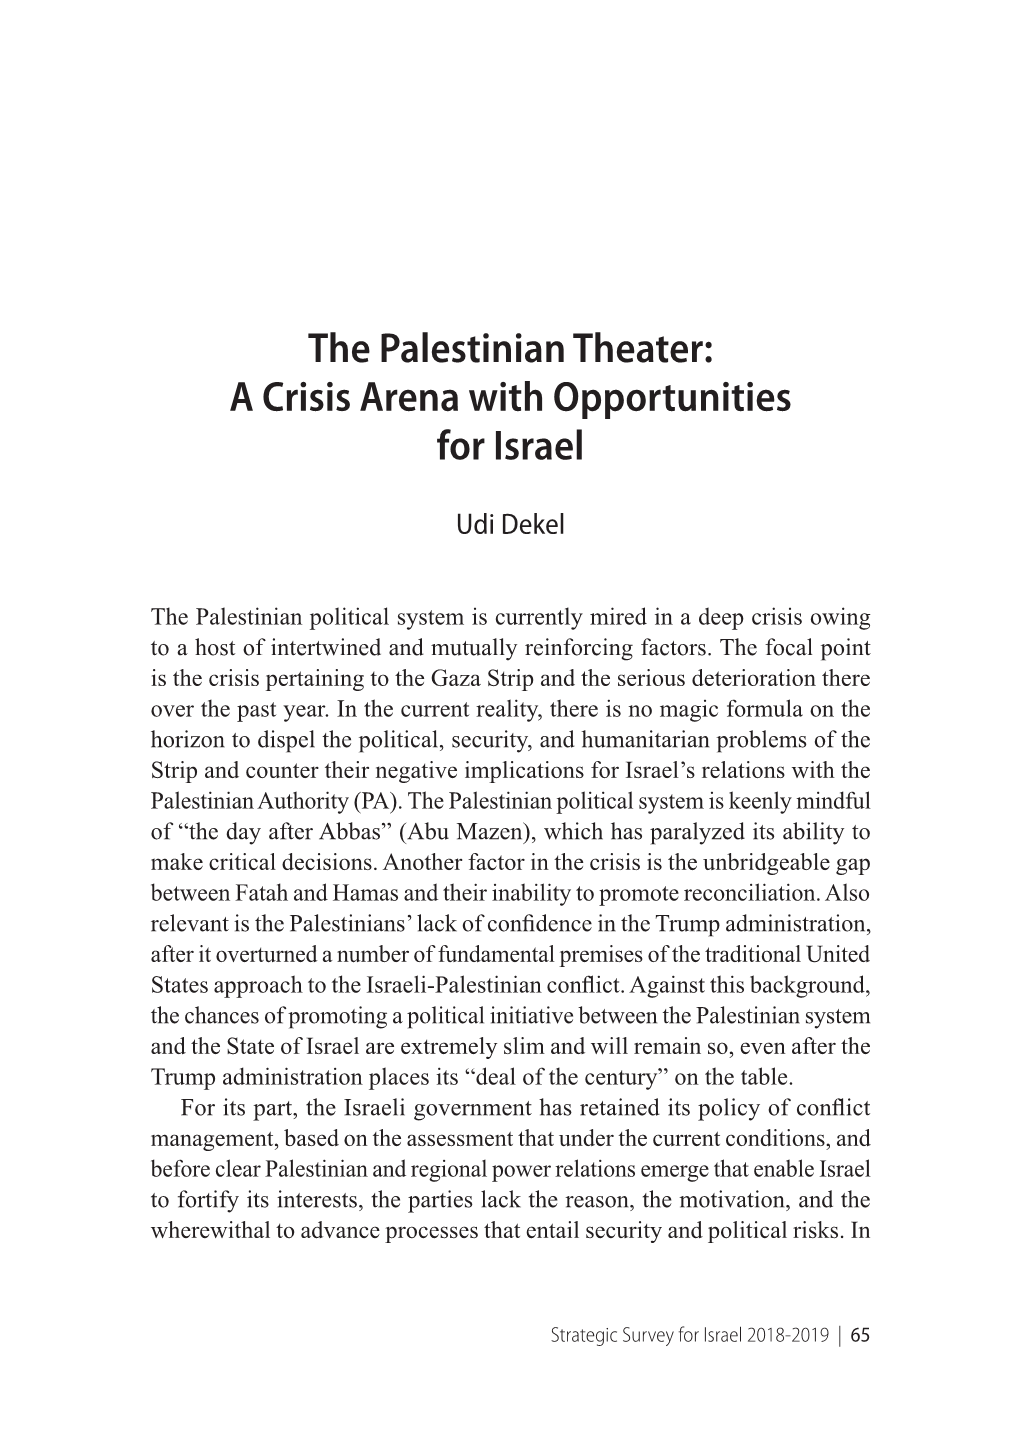 The Palestinian Theater: a Crisis Arena with Opportunities for Israel